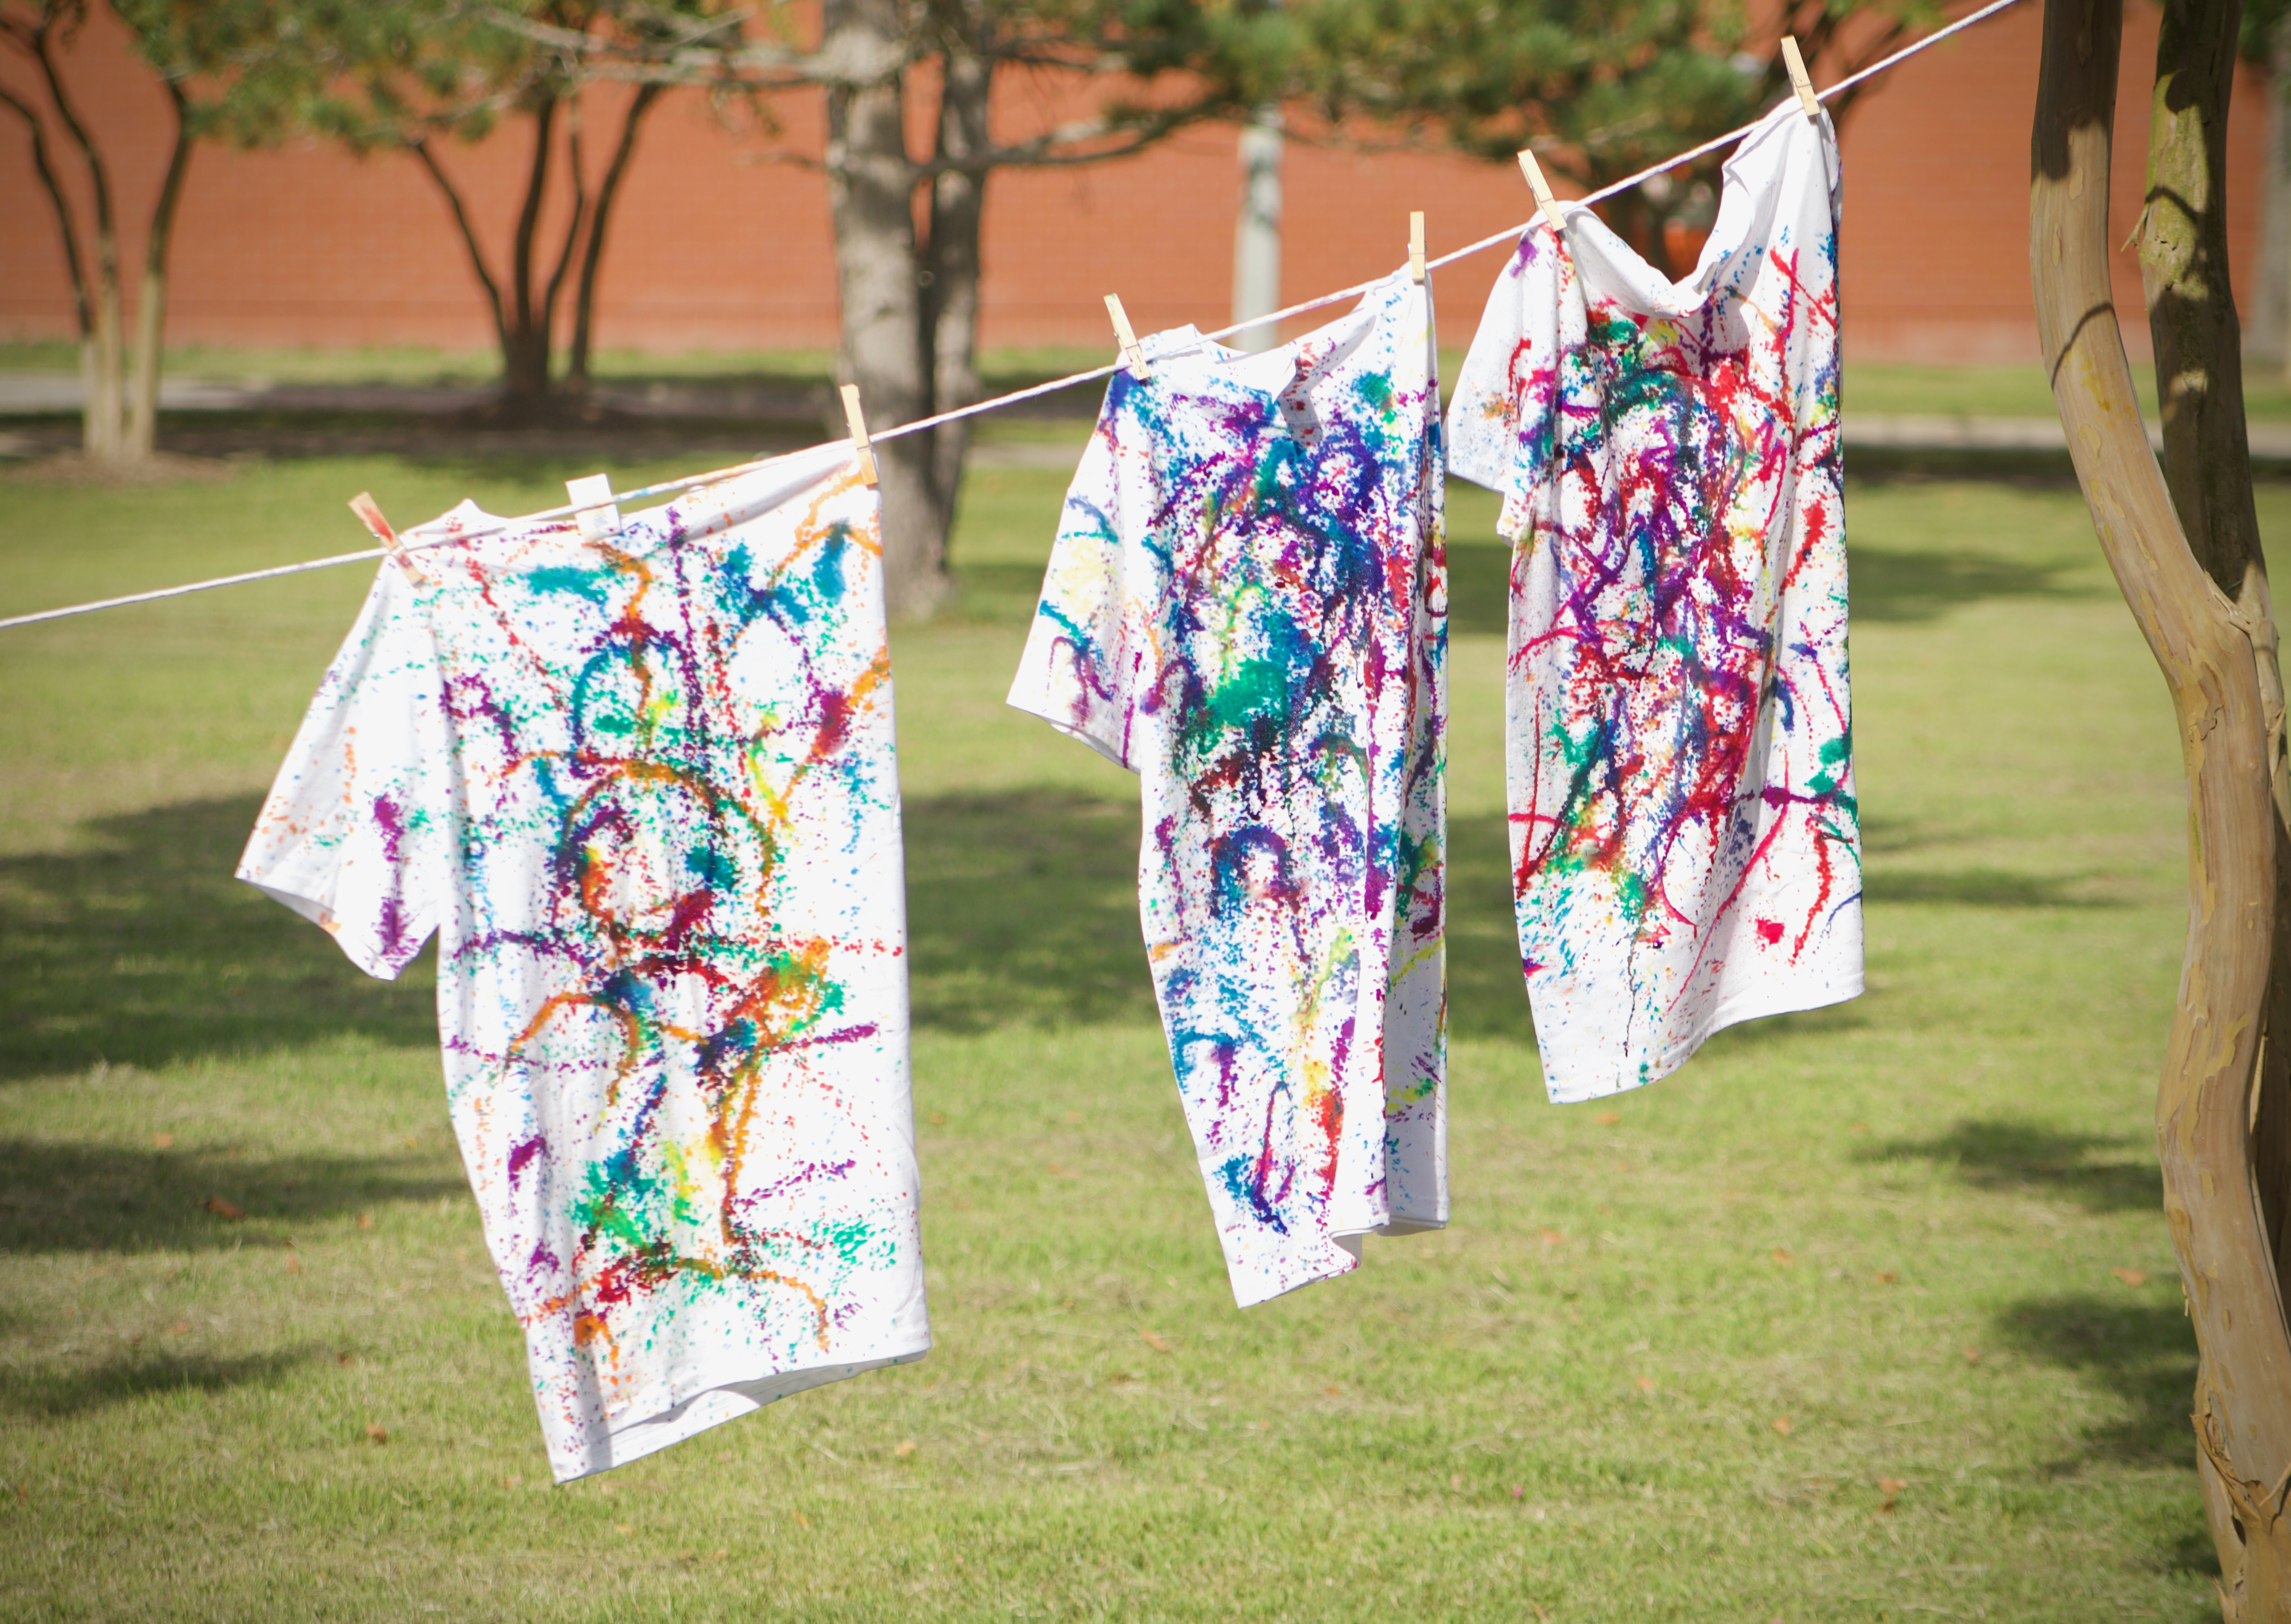 A photo of a clothesline with three shirts. All the shirts have varying levels of tie-dye.